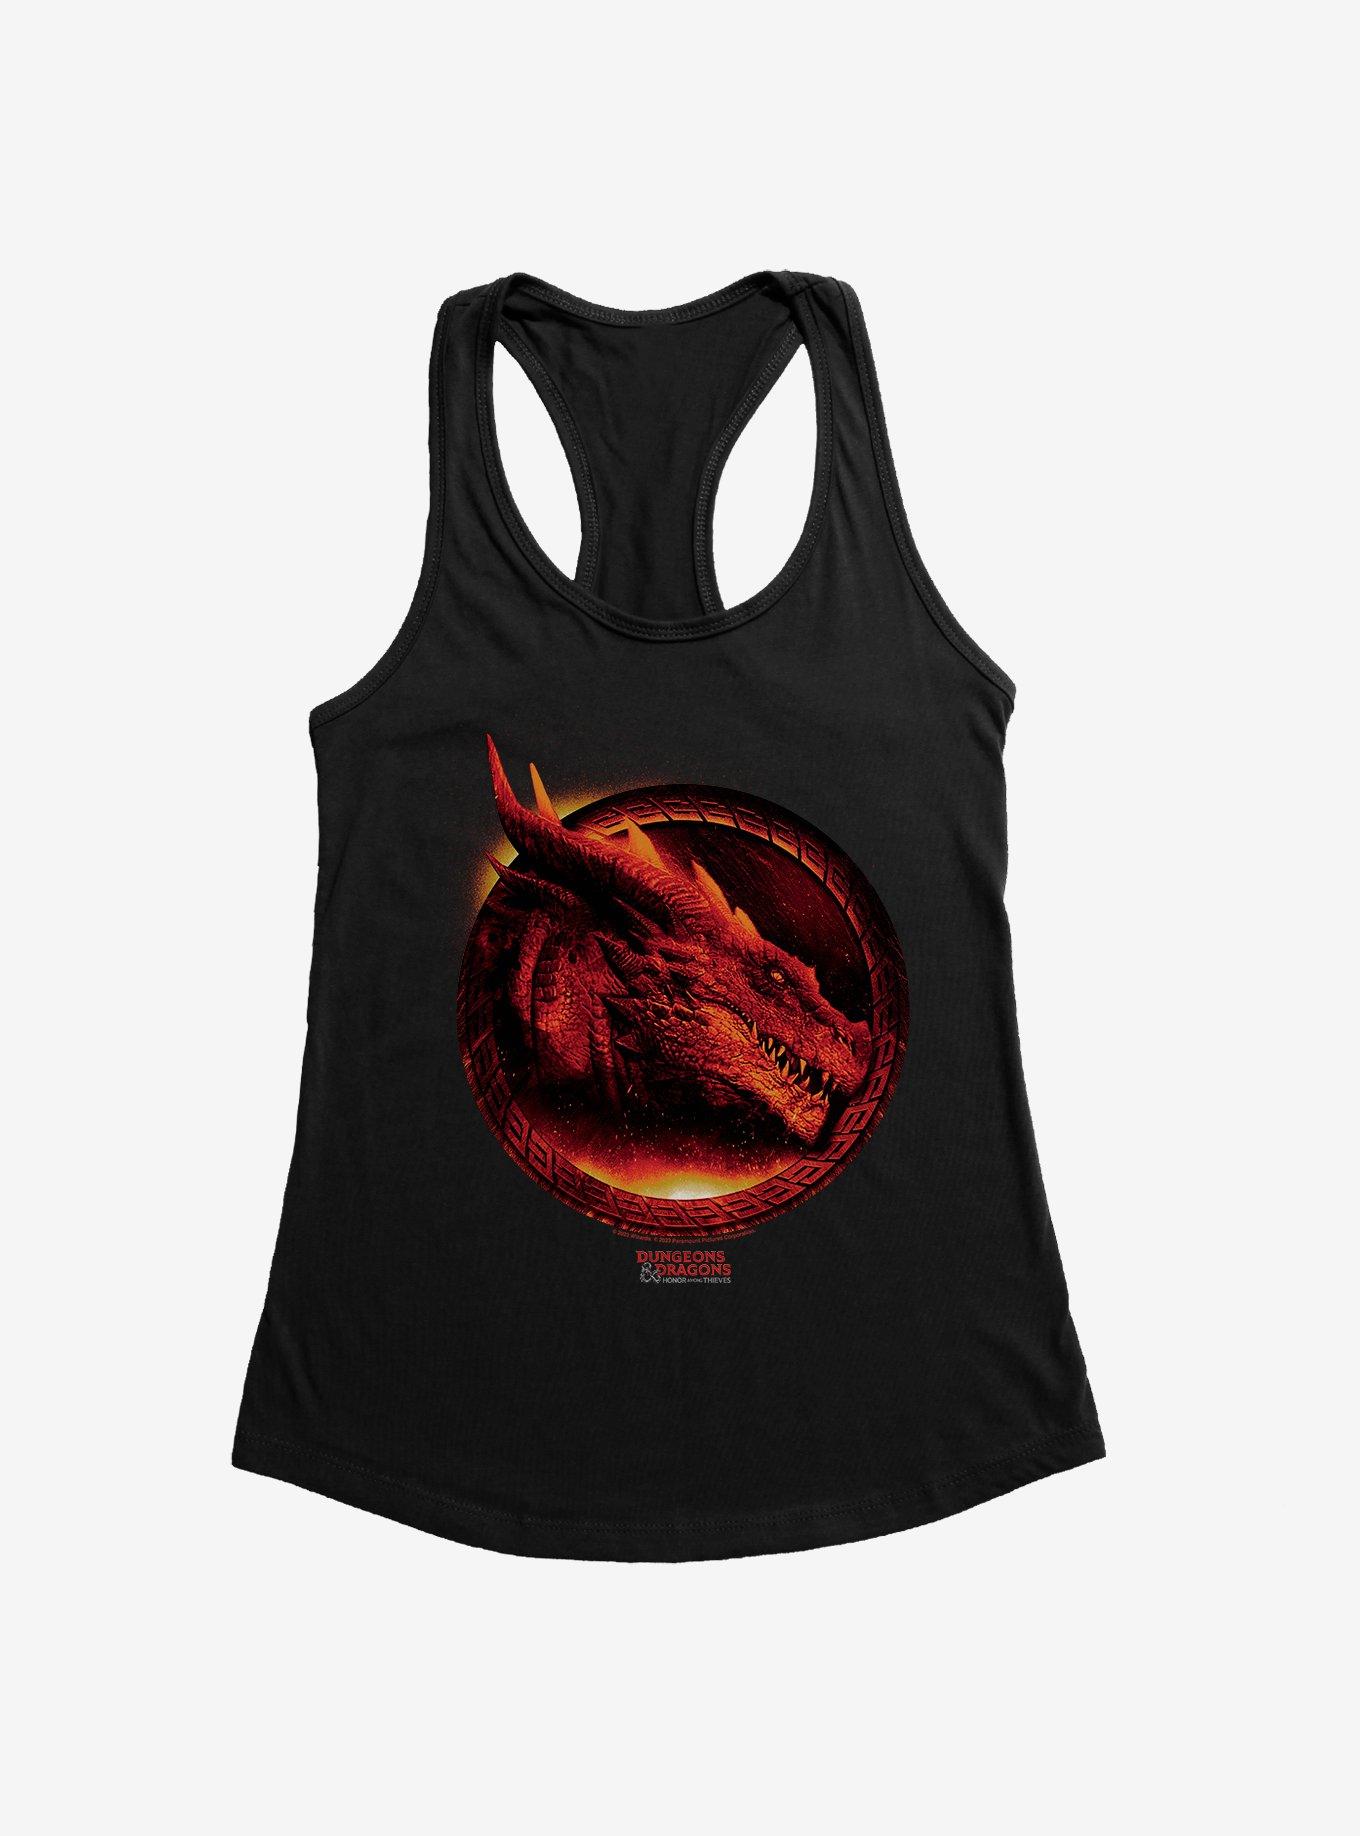 Dungeons & Dragons: Honor Among Thieves Red Dragon Womens Tank Top, BLACK, hi-res